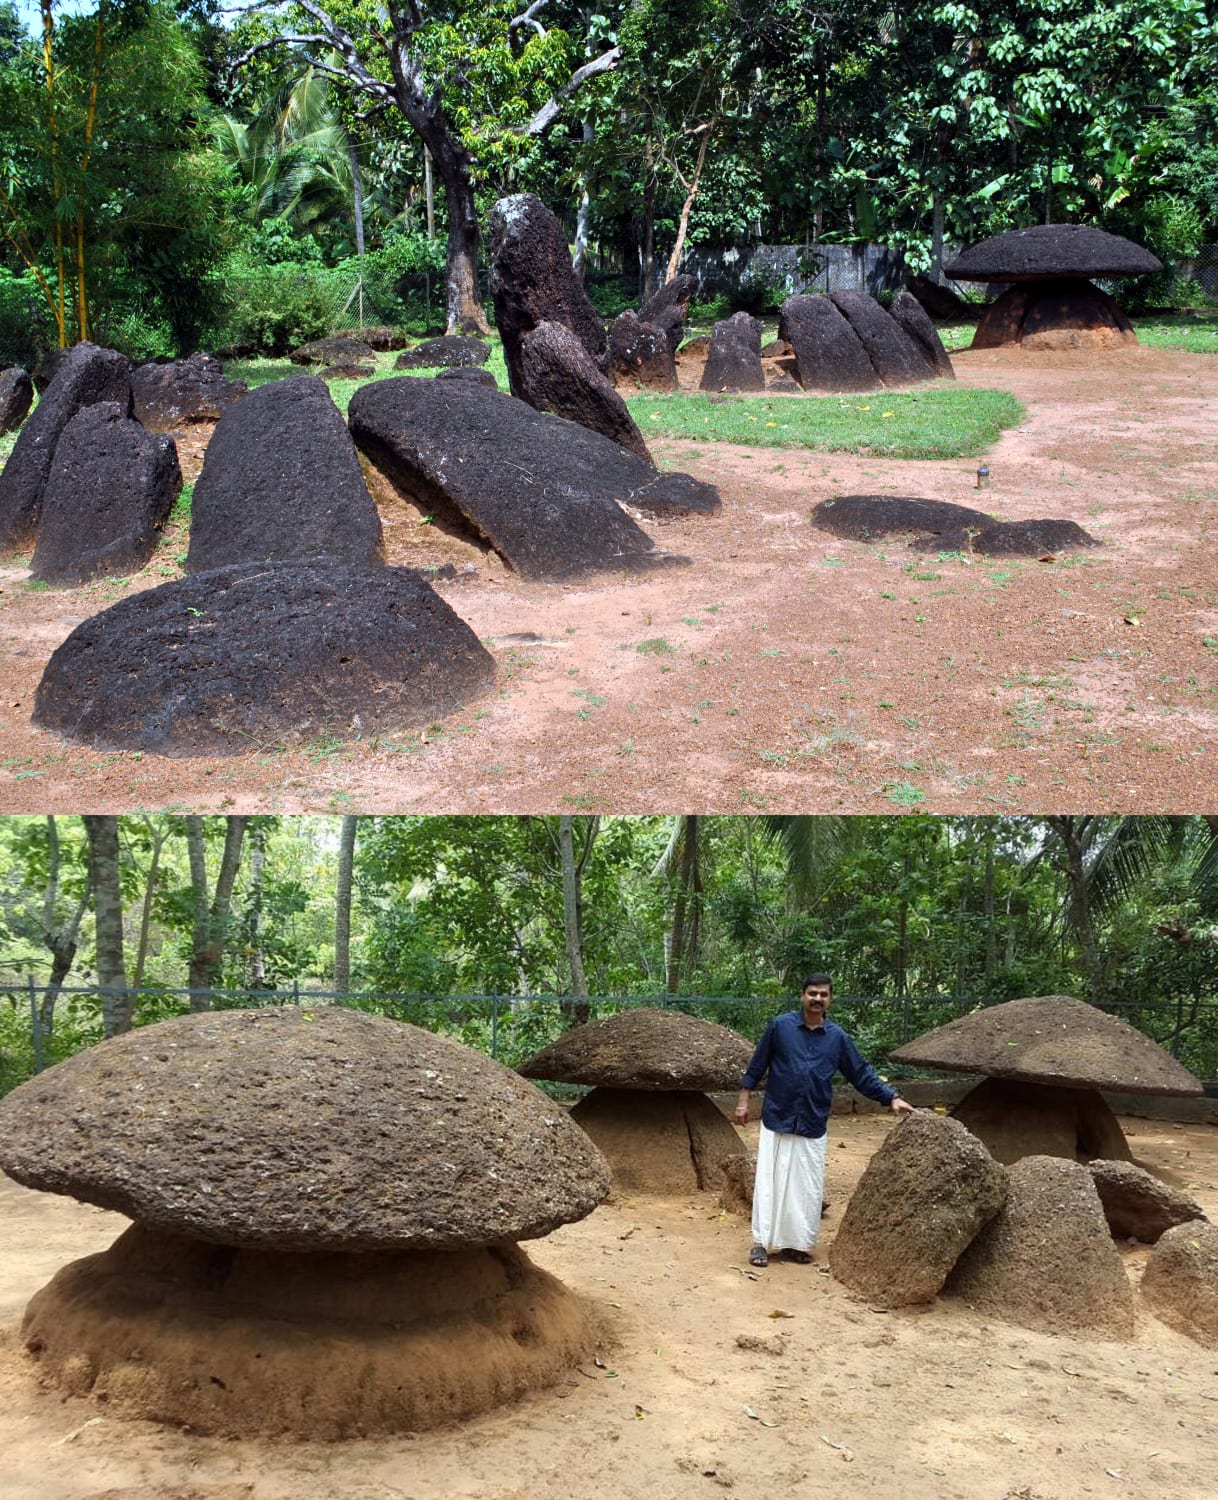 Kudakkallu Parambu is a prehistoric Megalith burial site situated in Chermanangad of Thrissur District in India. The site has 69 megalithic monuments, which were built 4000 years ago, spread over a small area